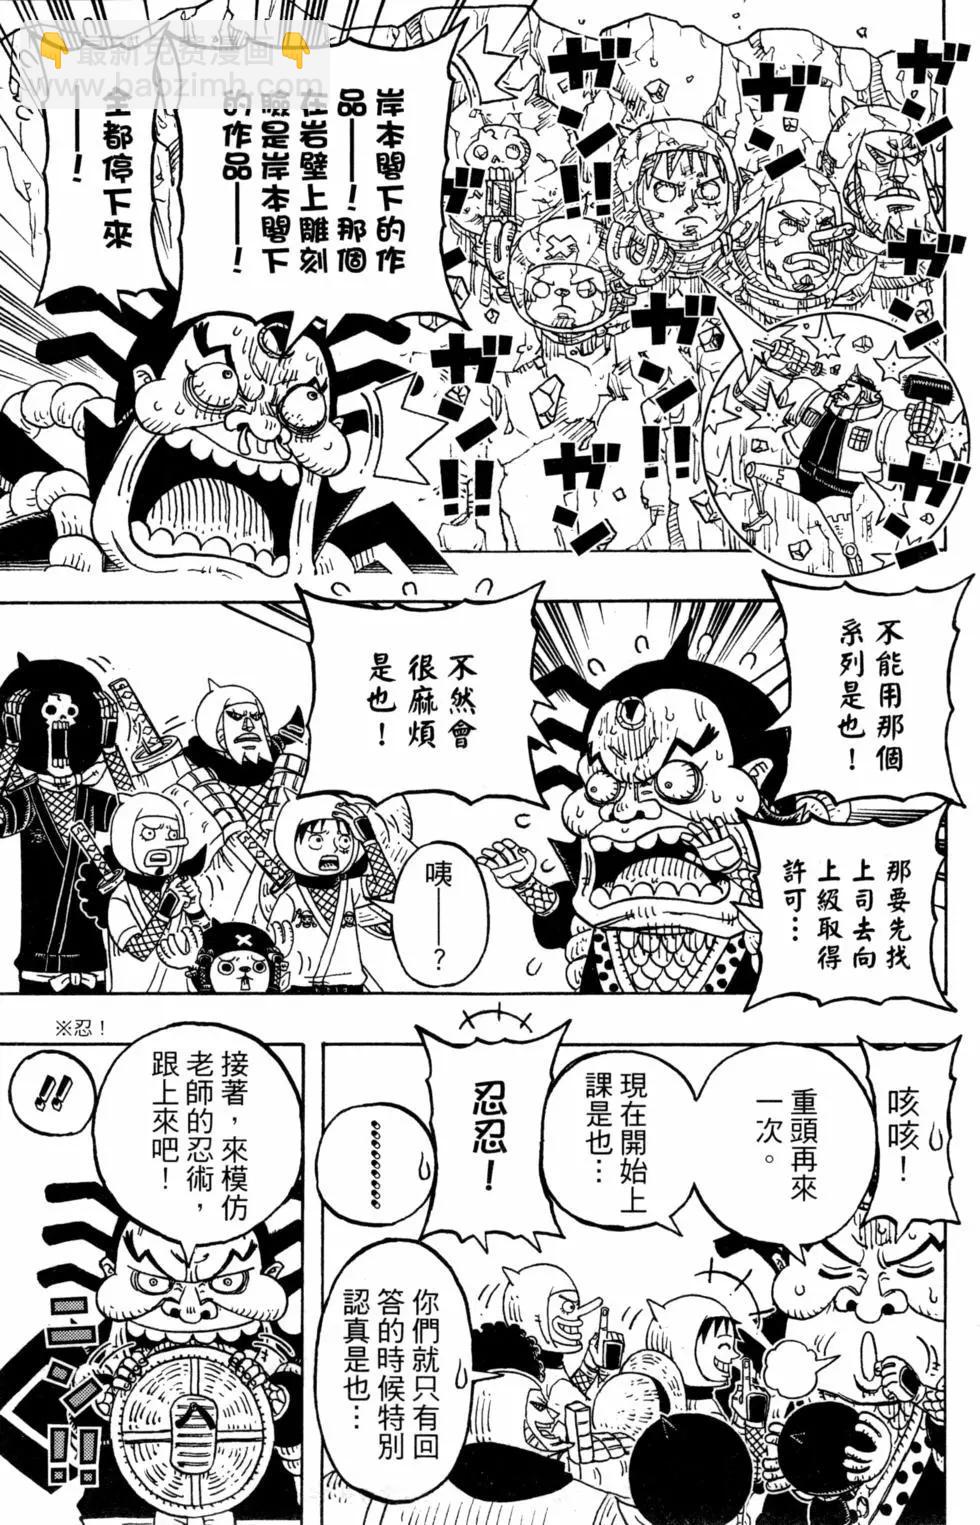 One piece party - 第06卷(1/4) - 4